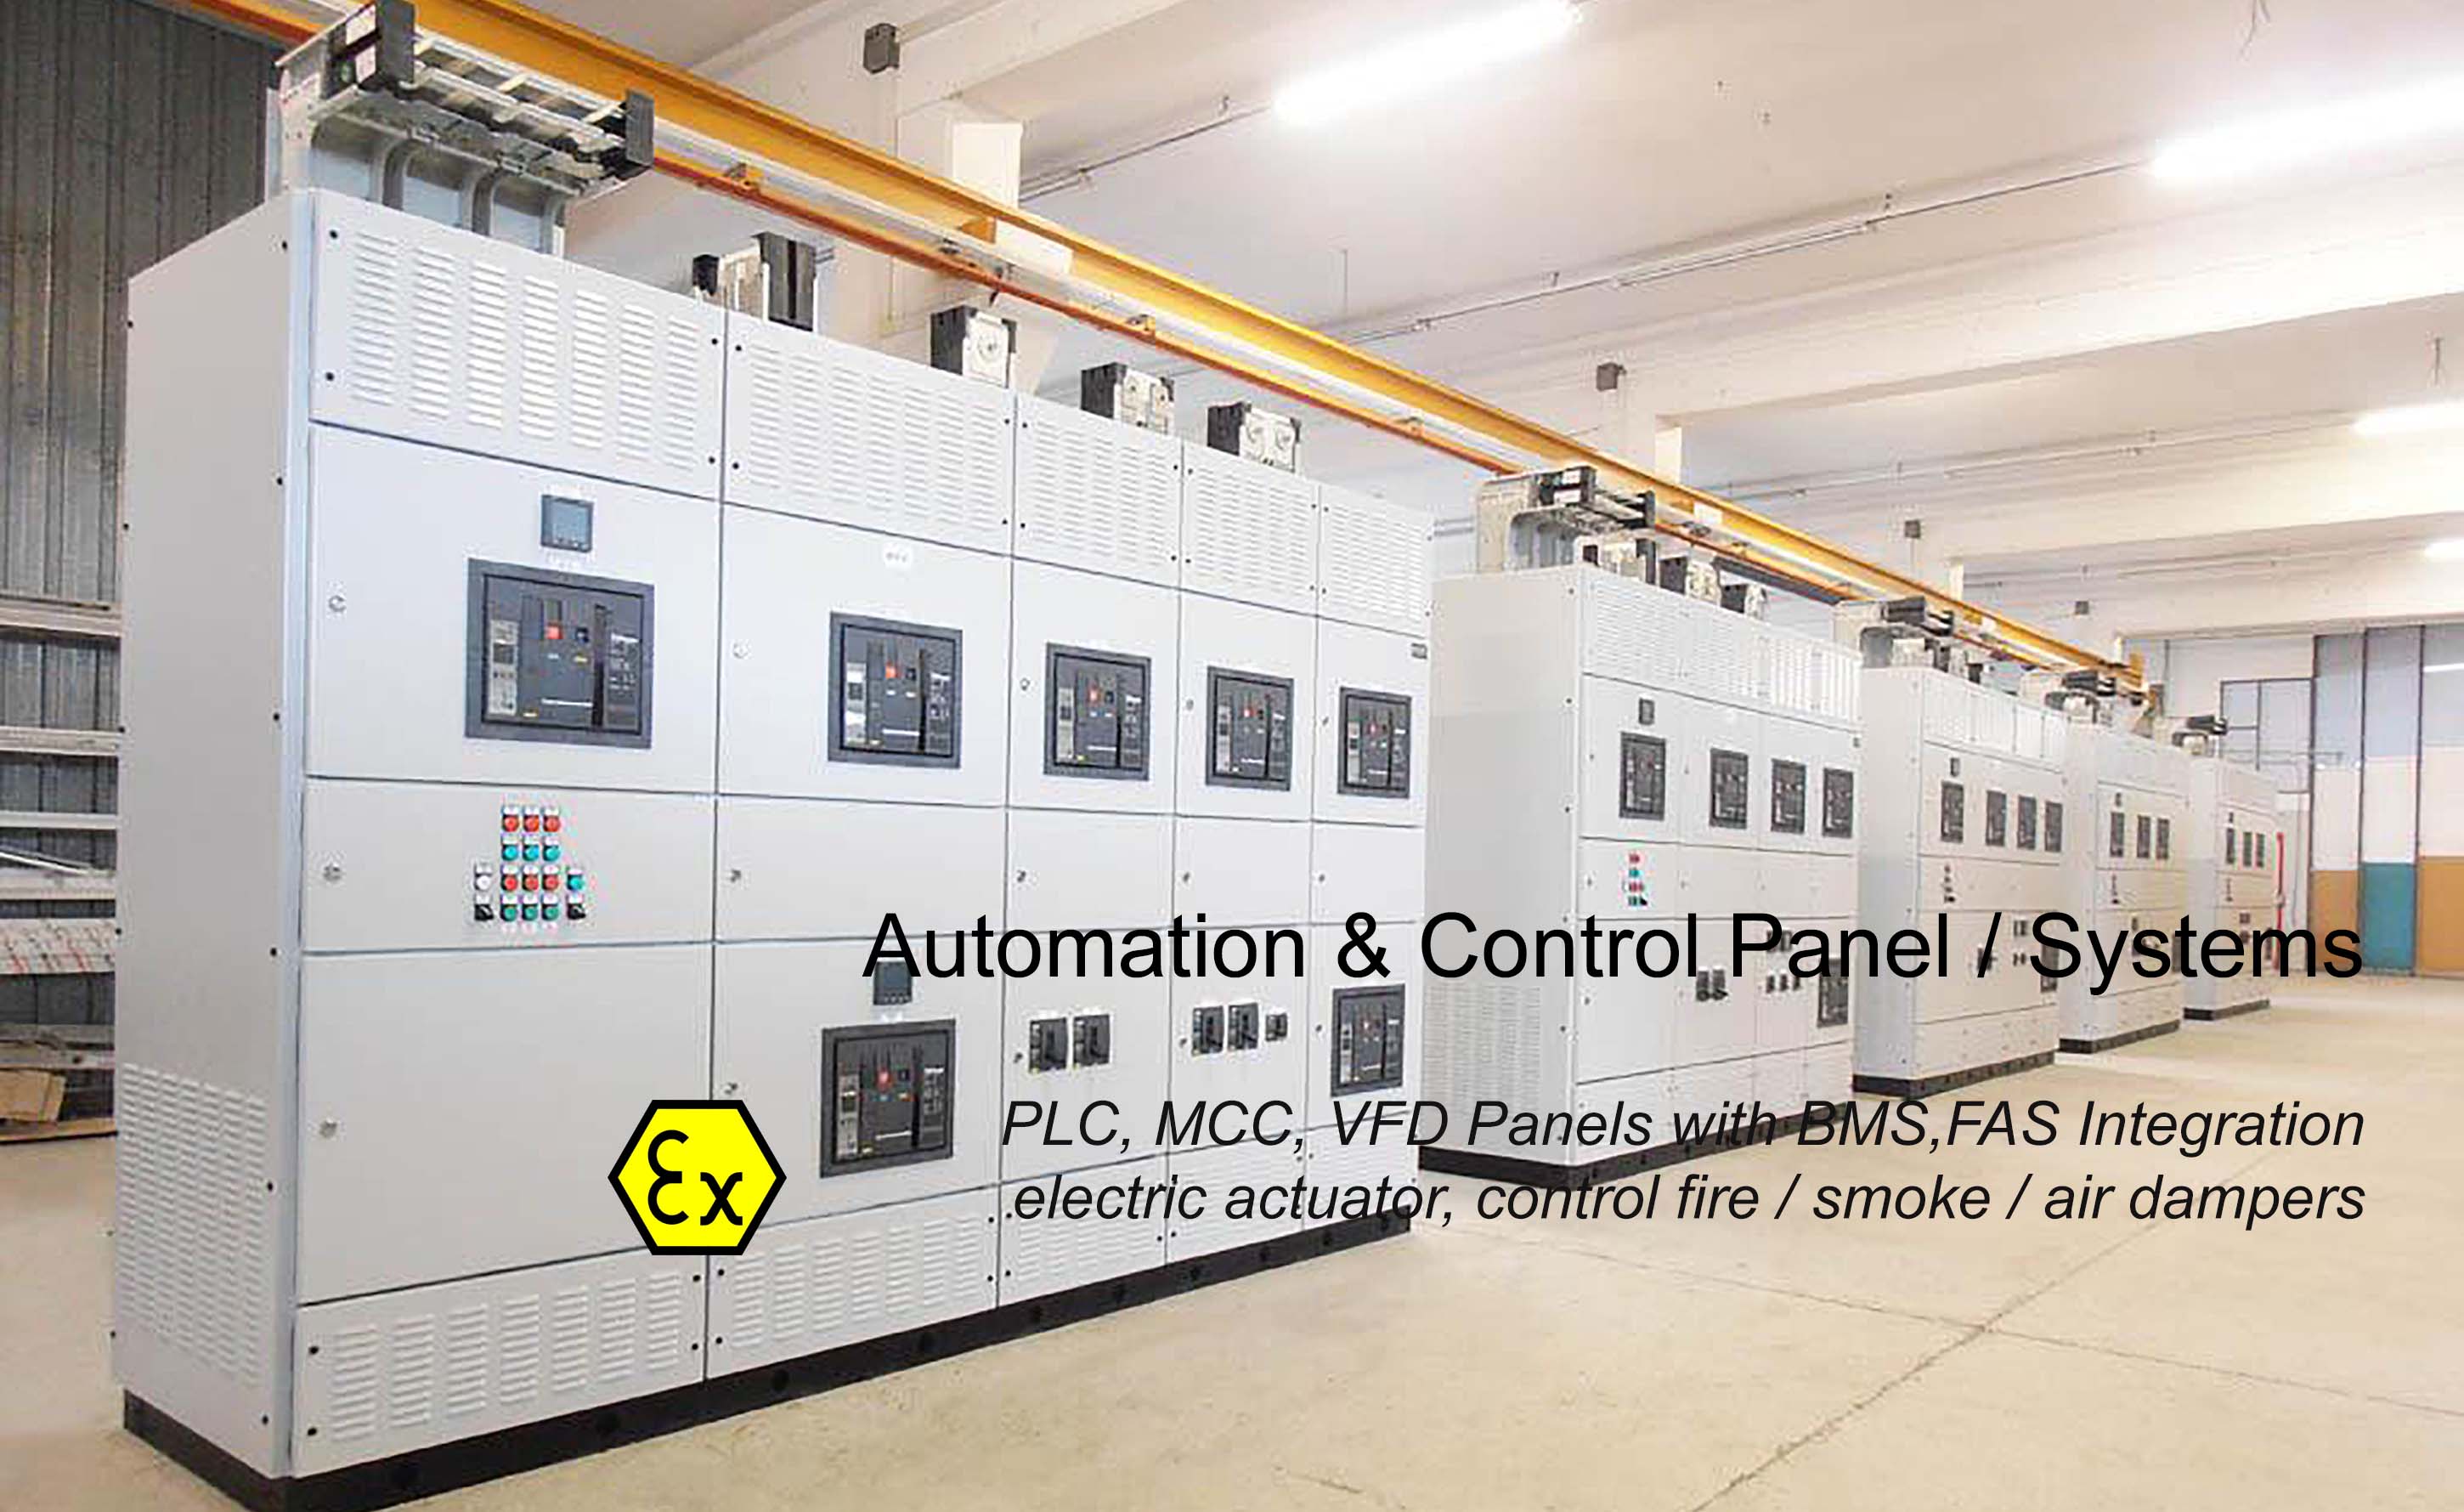 automation and control panel with PLC, VFD, MCC, FAS